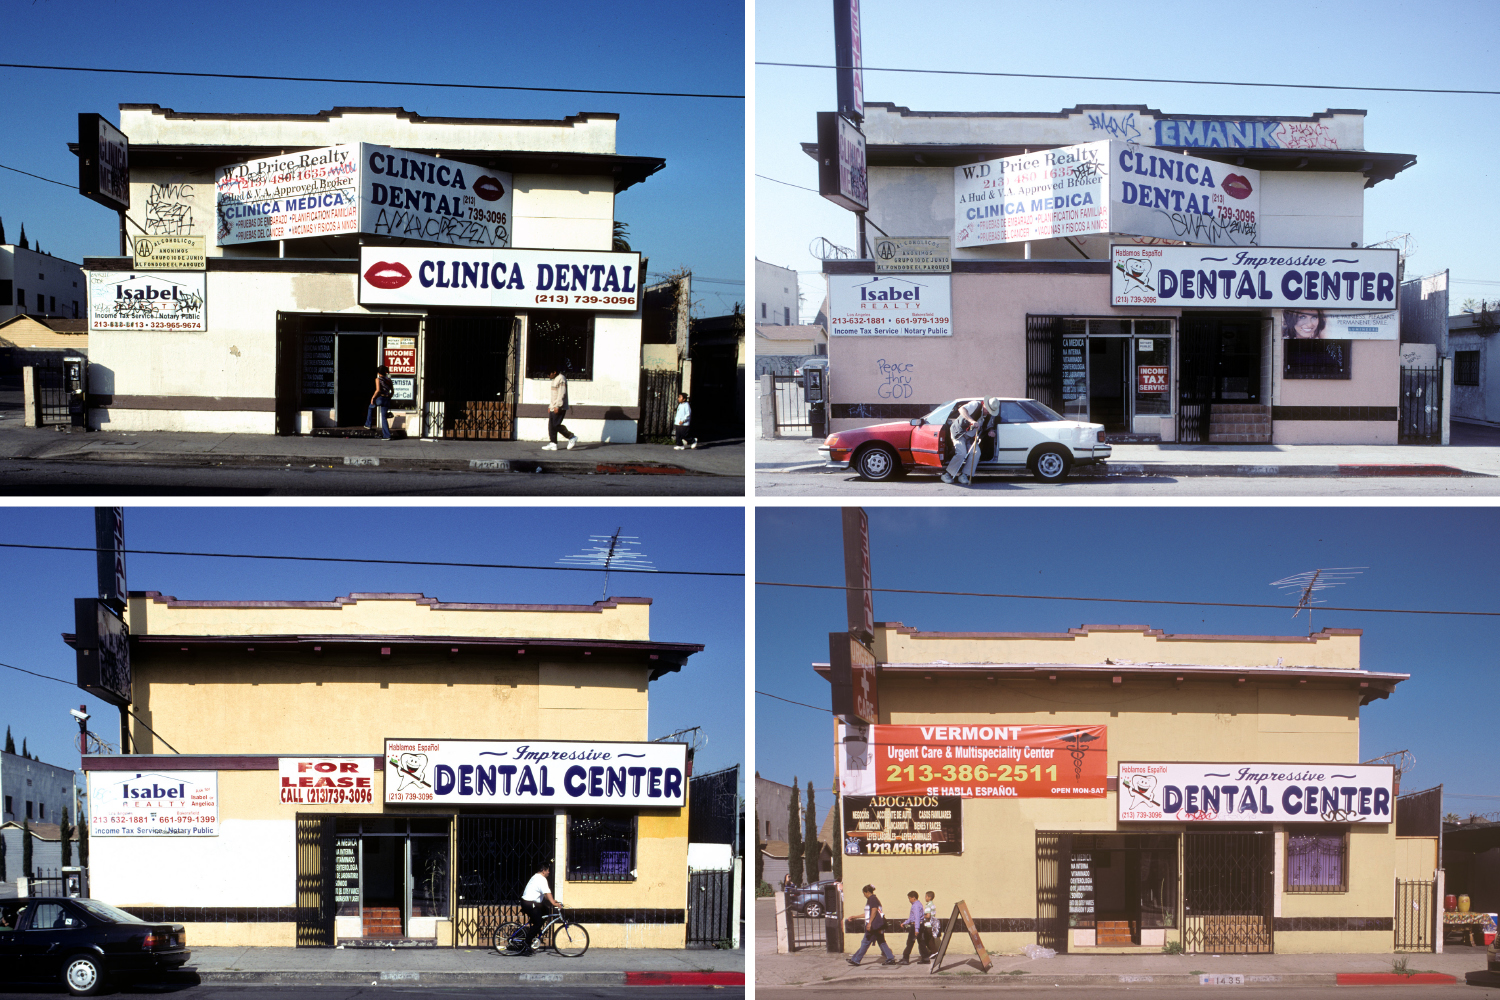 From top left: 1435 S. Vermont Ave, L.A., 2005; 1435 S. Vermont Ave, L.A., 2006; 1435 S. Vermont Ave, L.A., 2009; 1435 S. Vermont Ave, L.A., 2012.